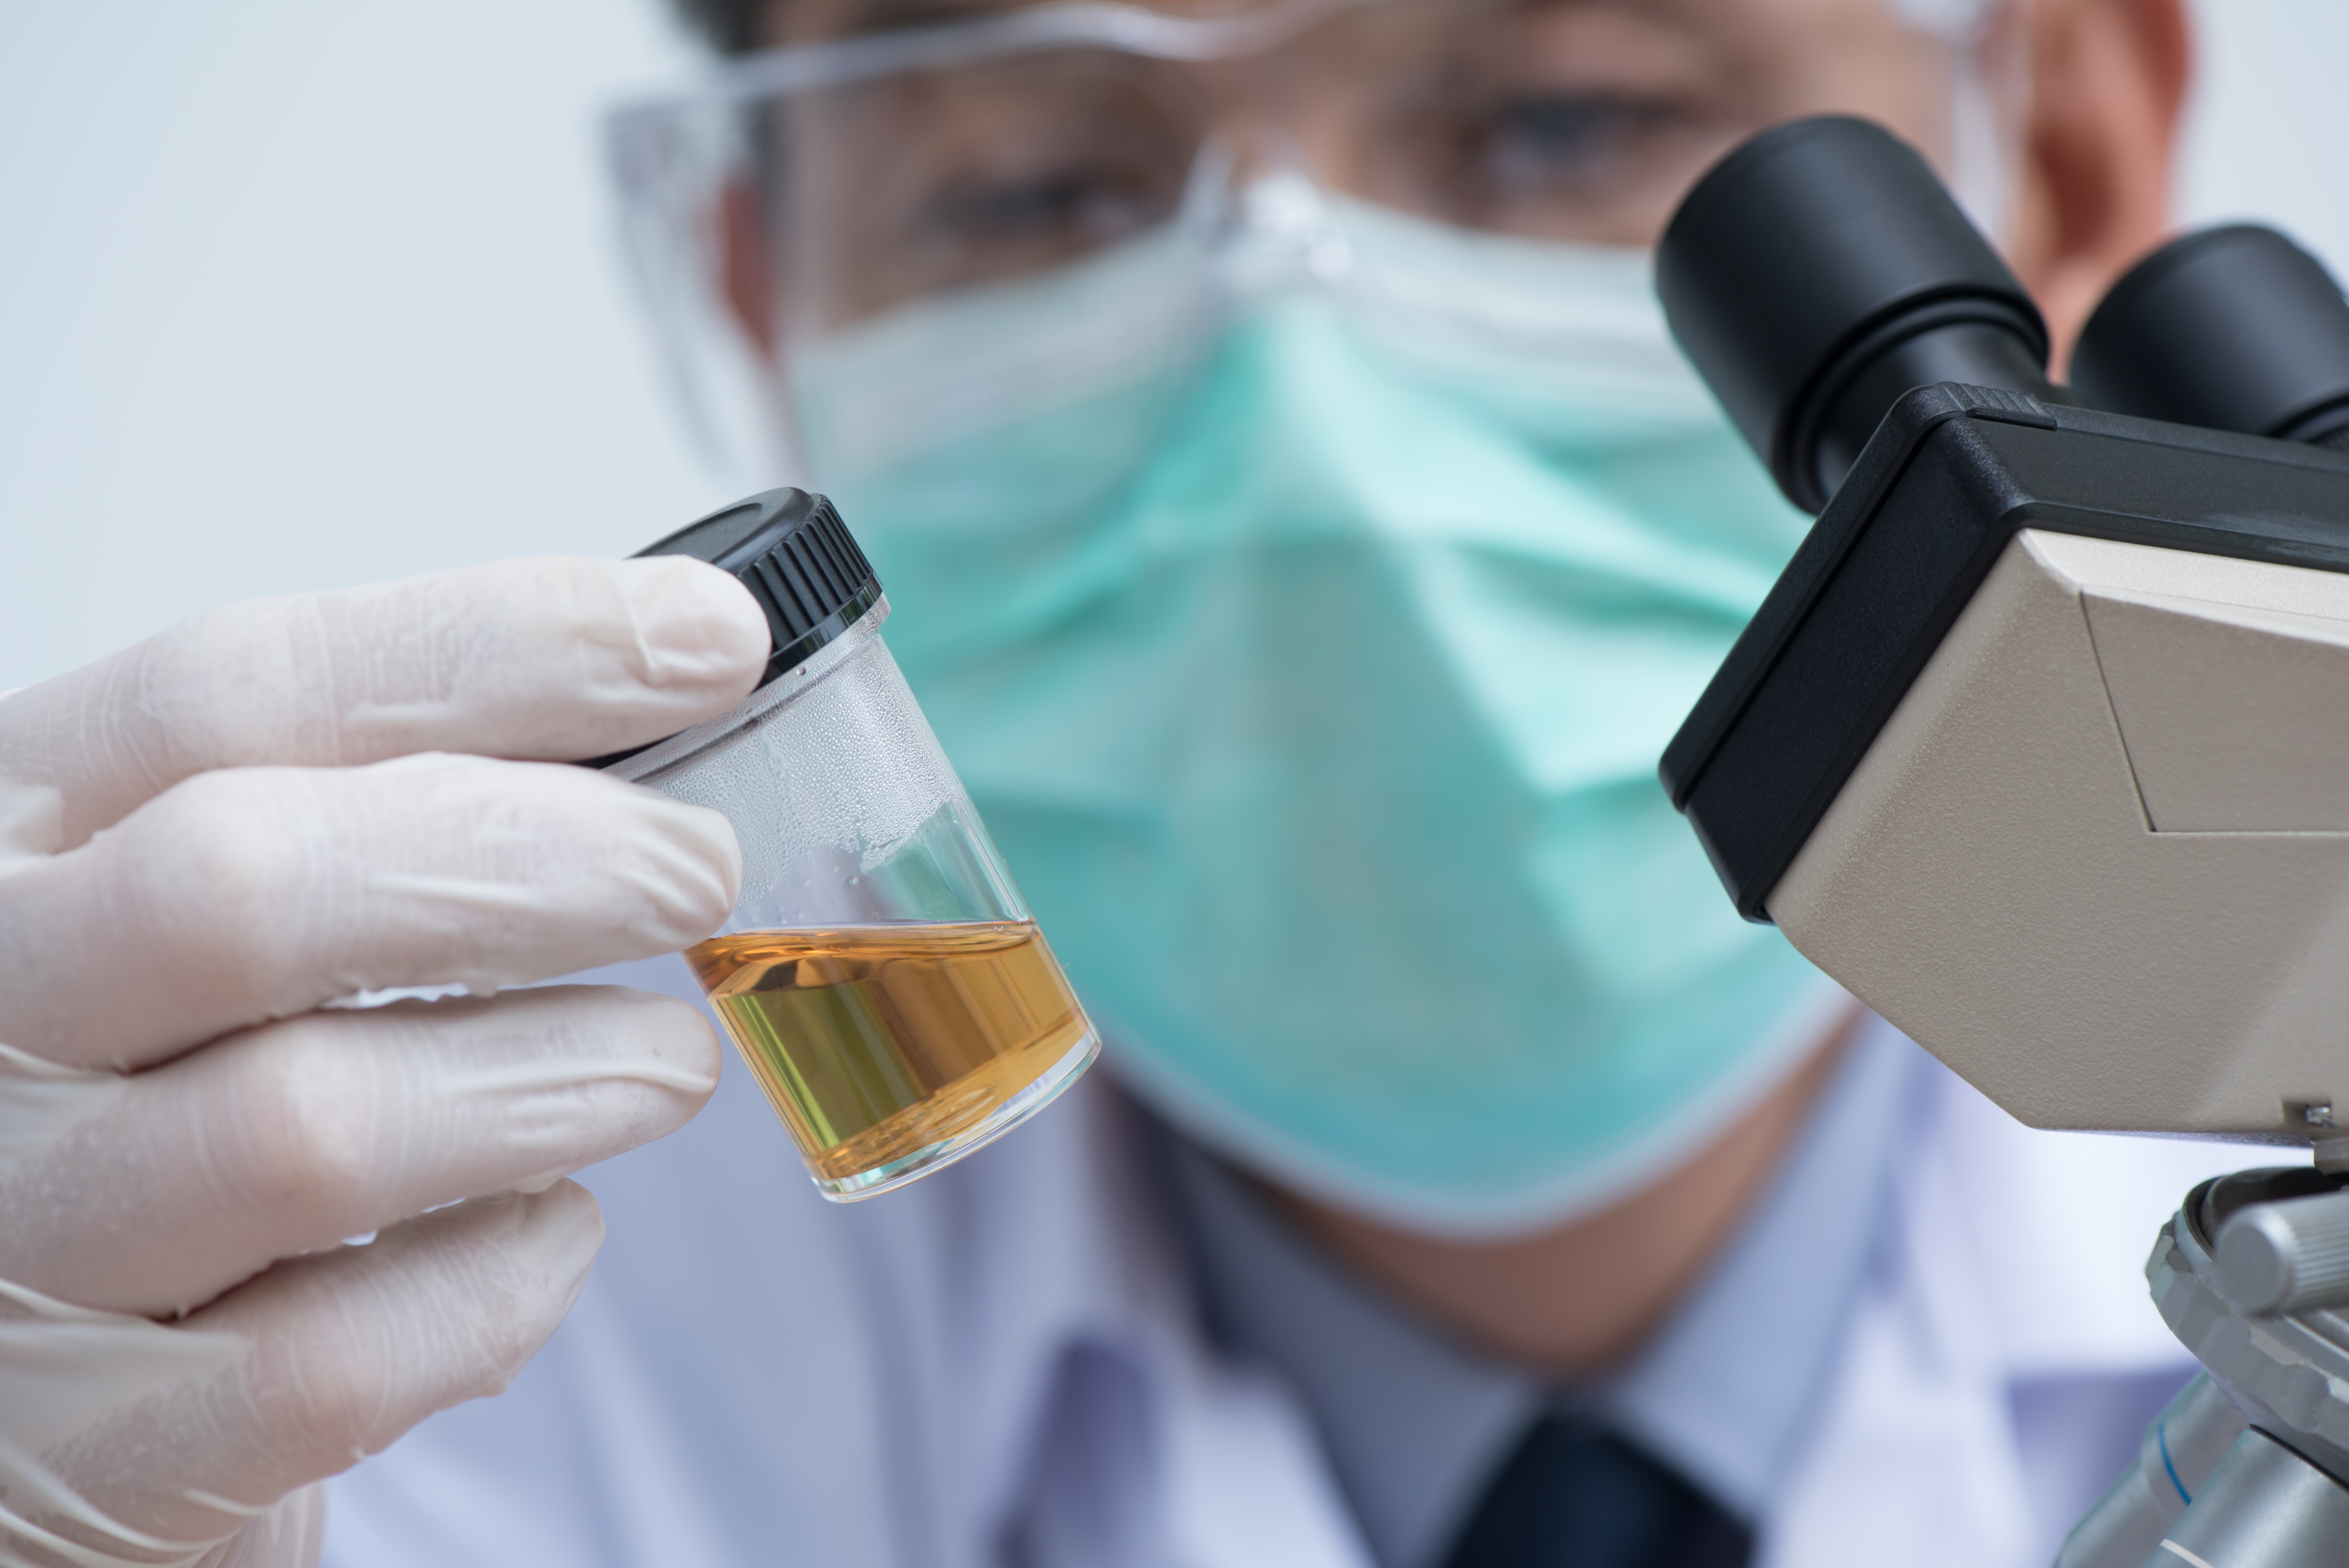 Scientist looking closely at a urine sample